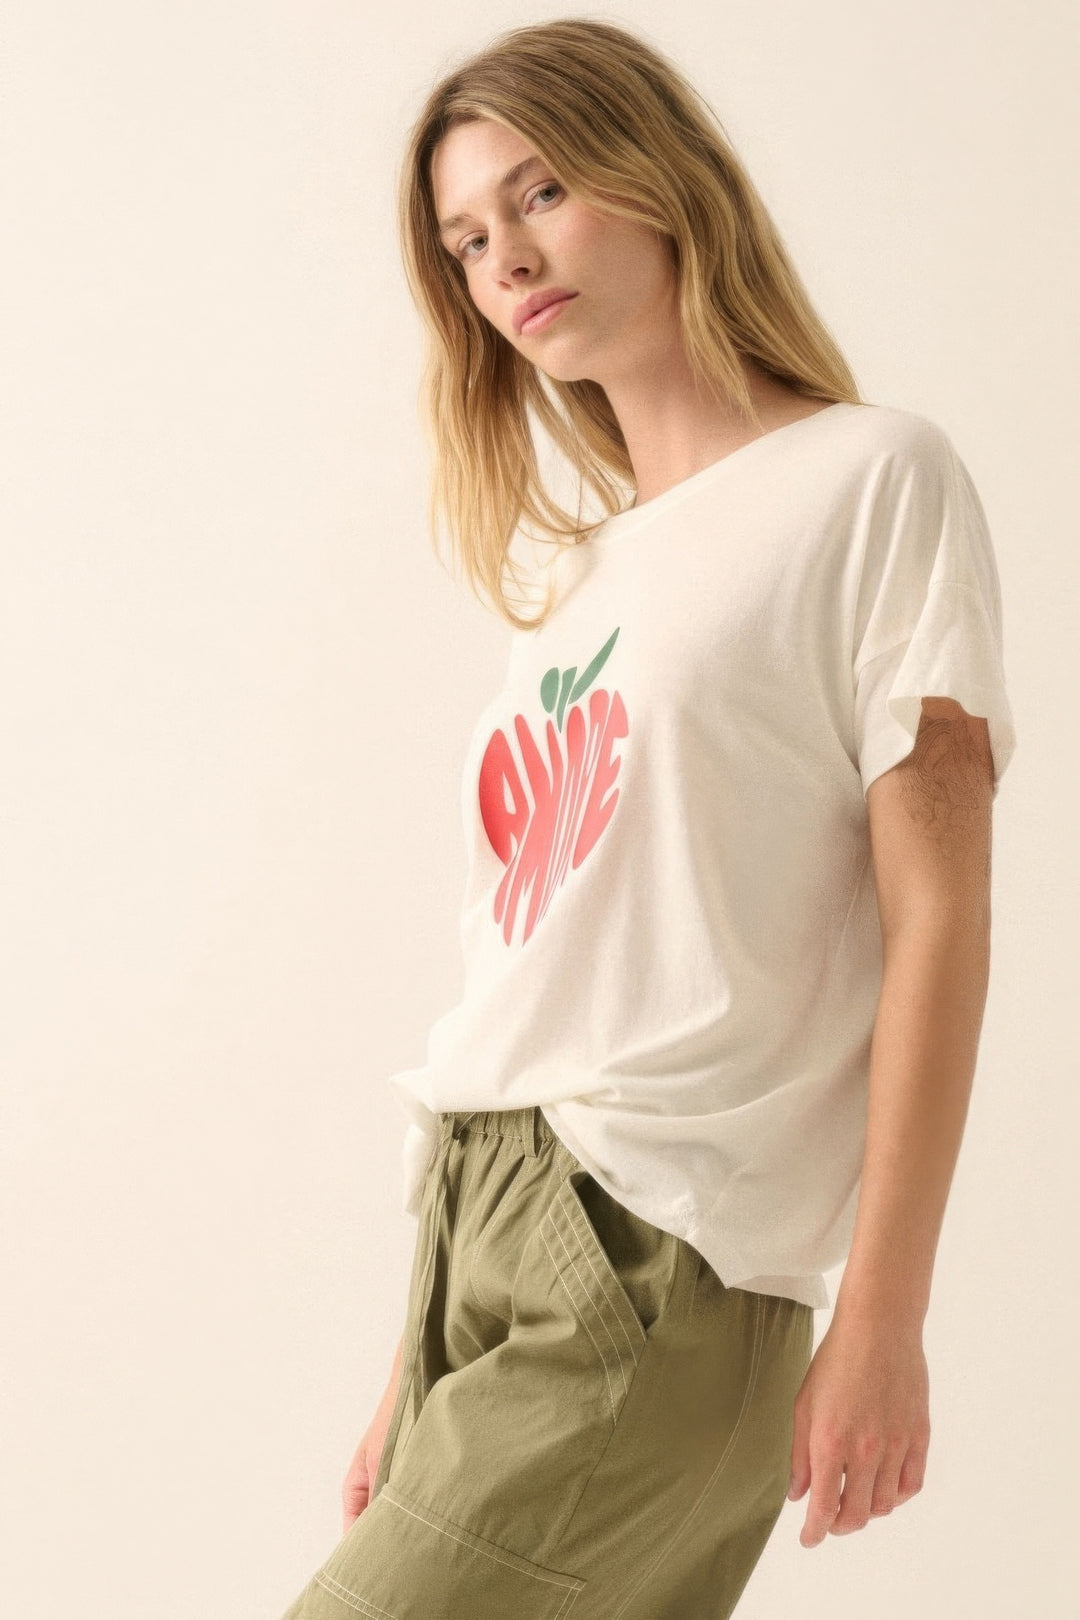 AMORE Apple Heart Graphic Tee | 100% Cotton | Garment-Washed | Ivory | Women's Graphic Tee